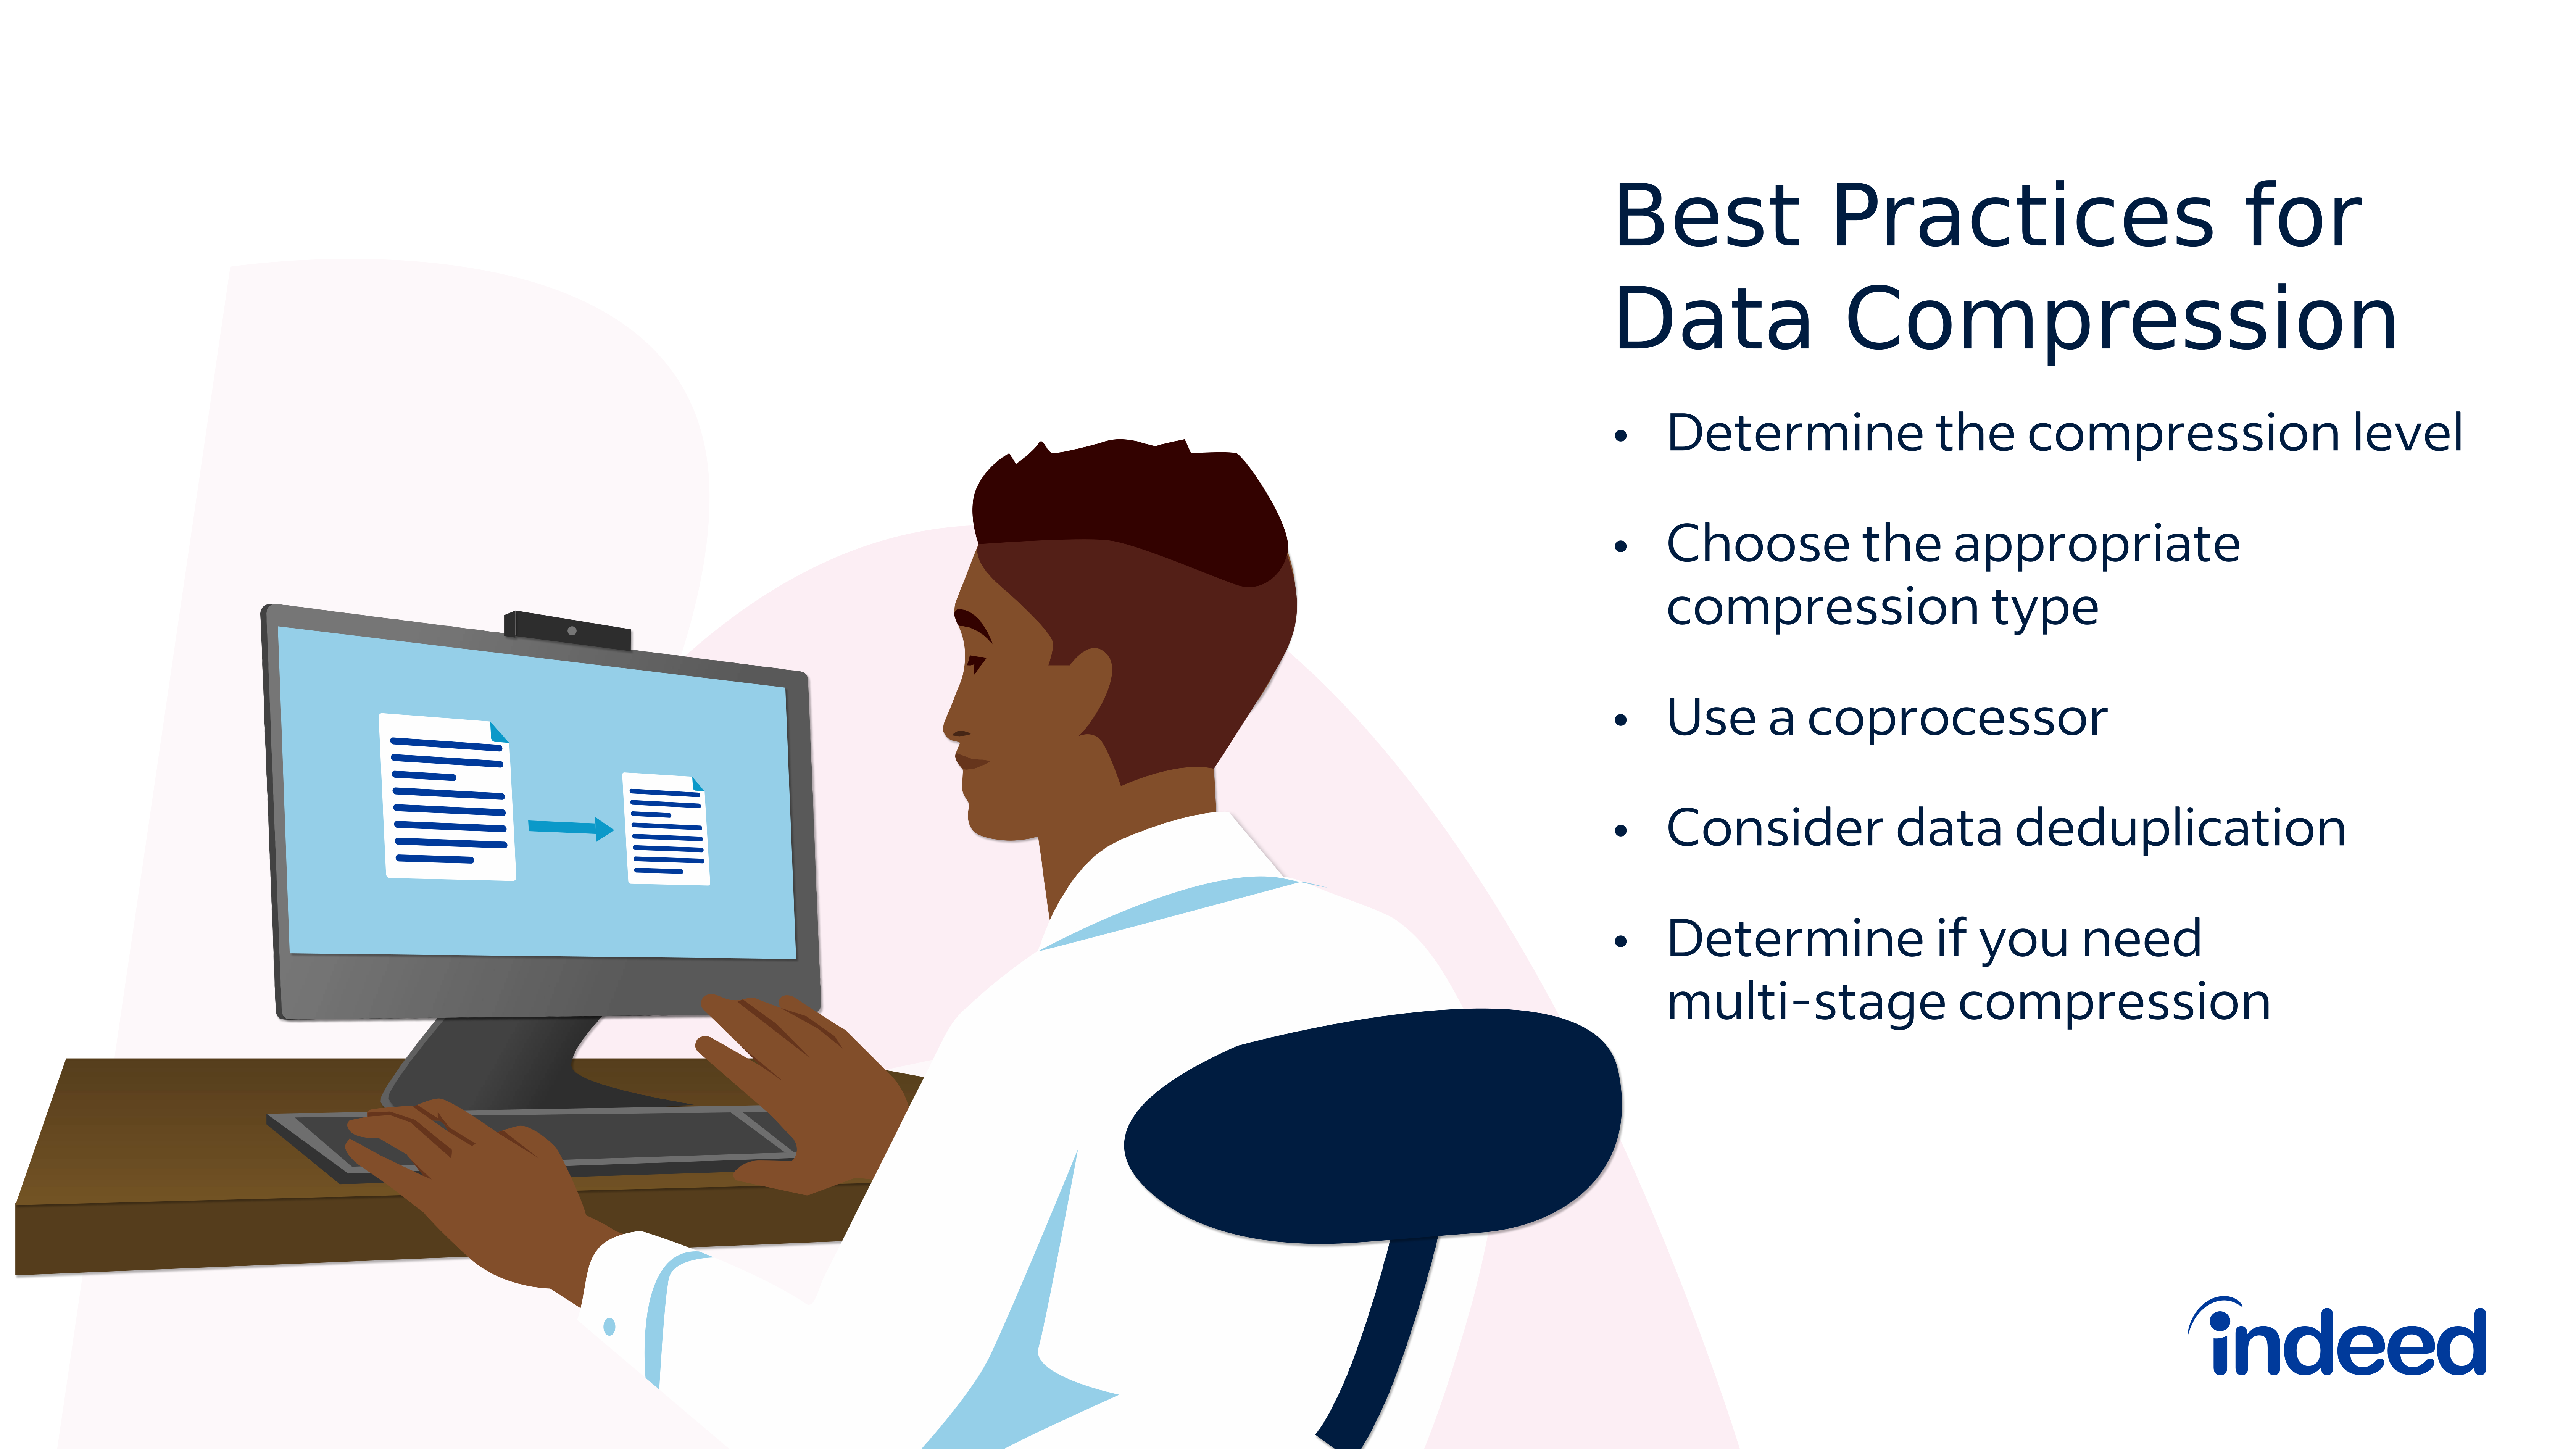 Data Compression: What It Is and Why It's Important